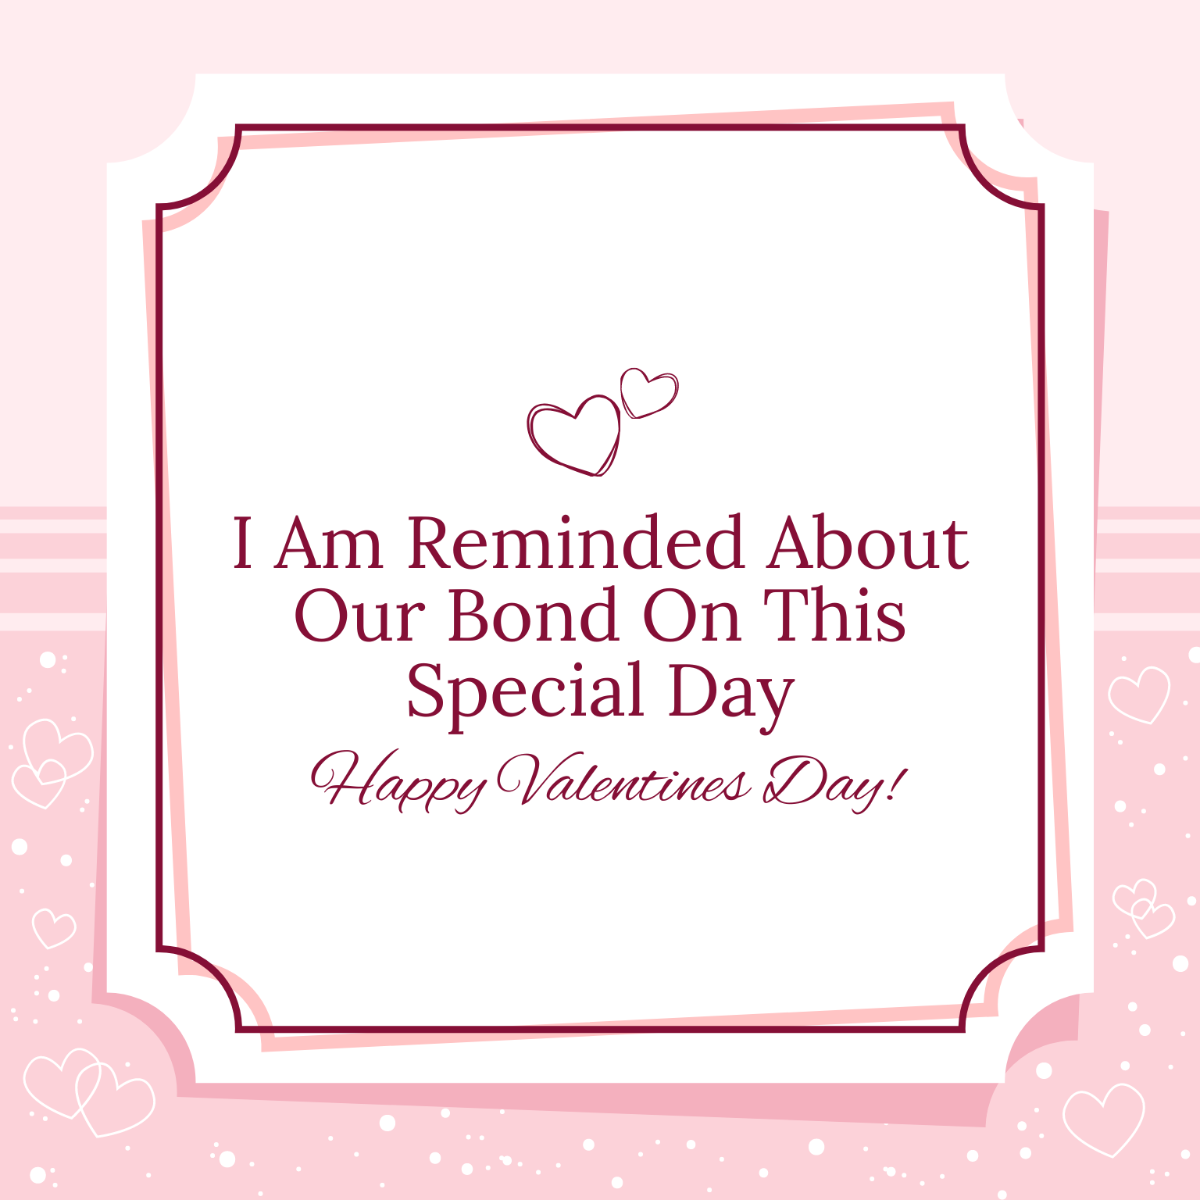 Valentine's Day Greeting Card Vector Template